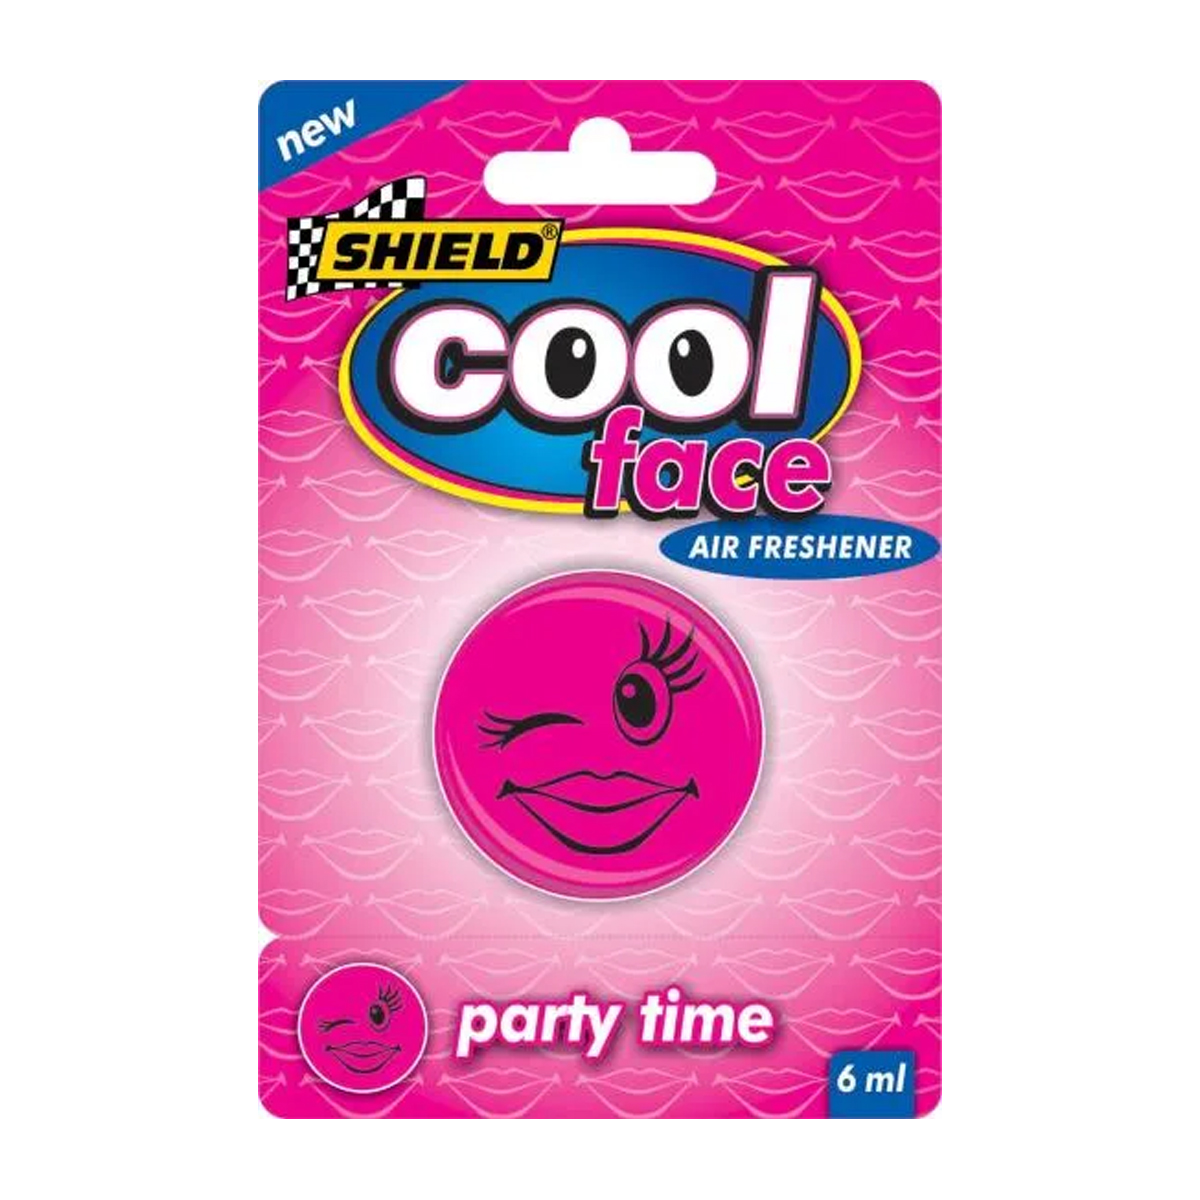 Shield Cool Face Freshener Party Time 6Ml